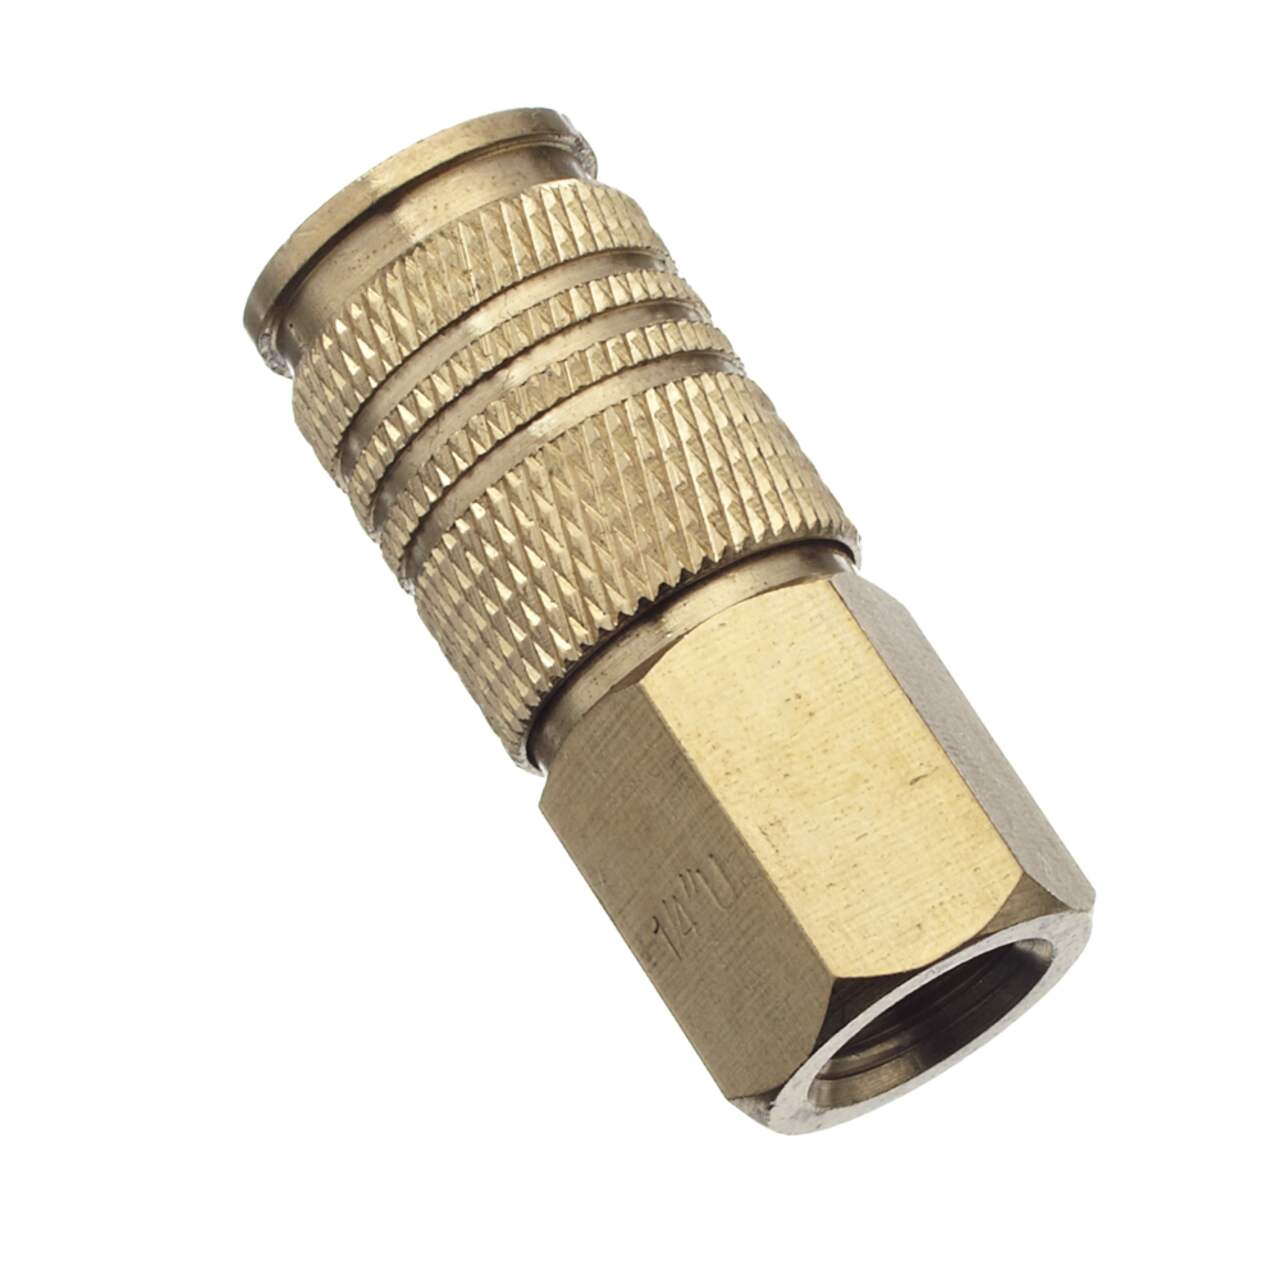 https://media-www.canadiantire.ca/product/fixing/tools/air-tools-accessories/0587841/mastercraft-brass-universal-coupler-4ef3f30c-bdac-4b9d-a9d9-d6a5bb784697.png?imdensity=1&imwidth=640&impolicy=mZoom